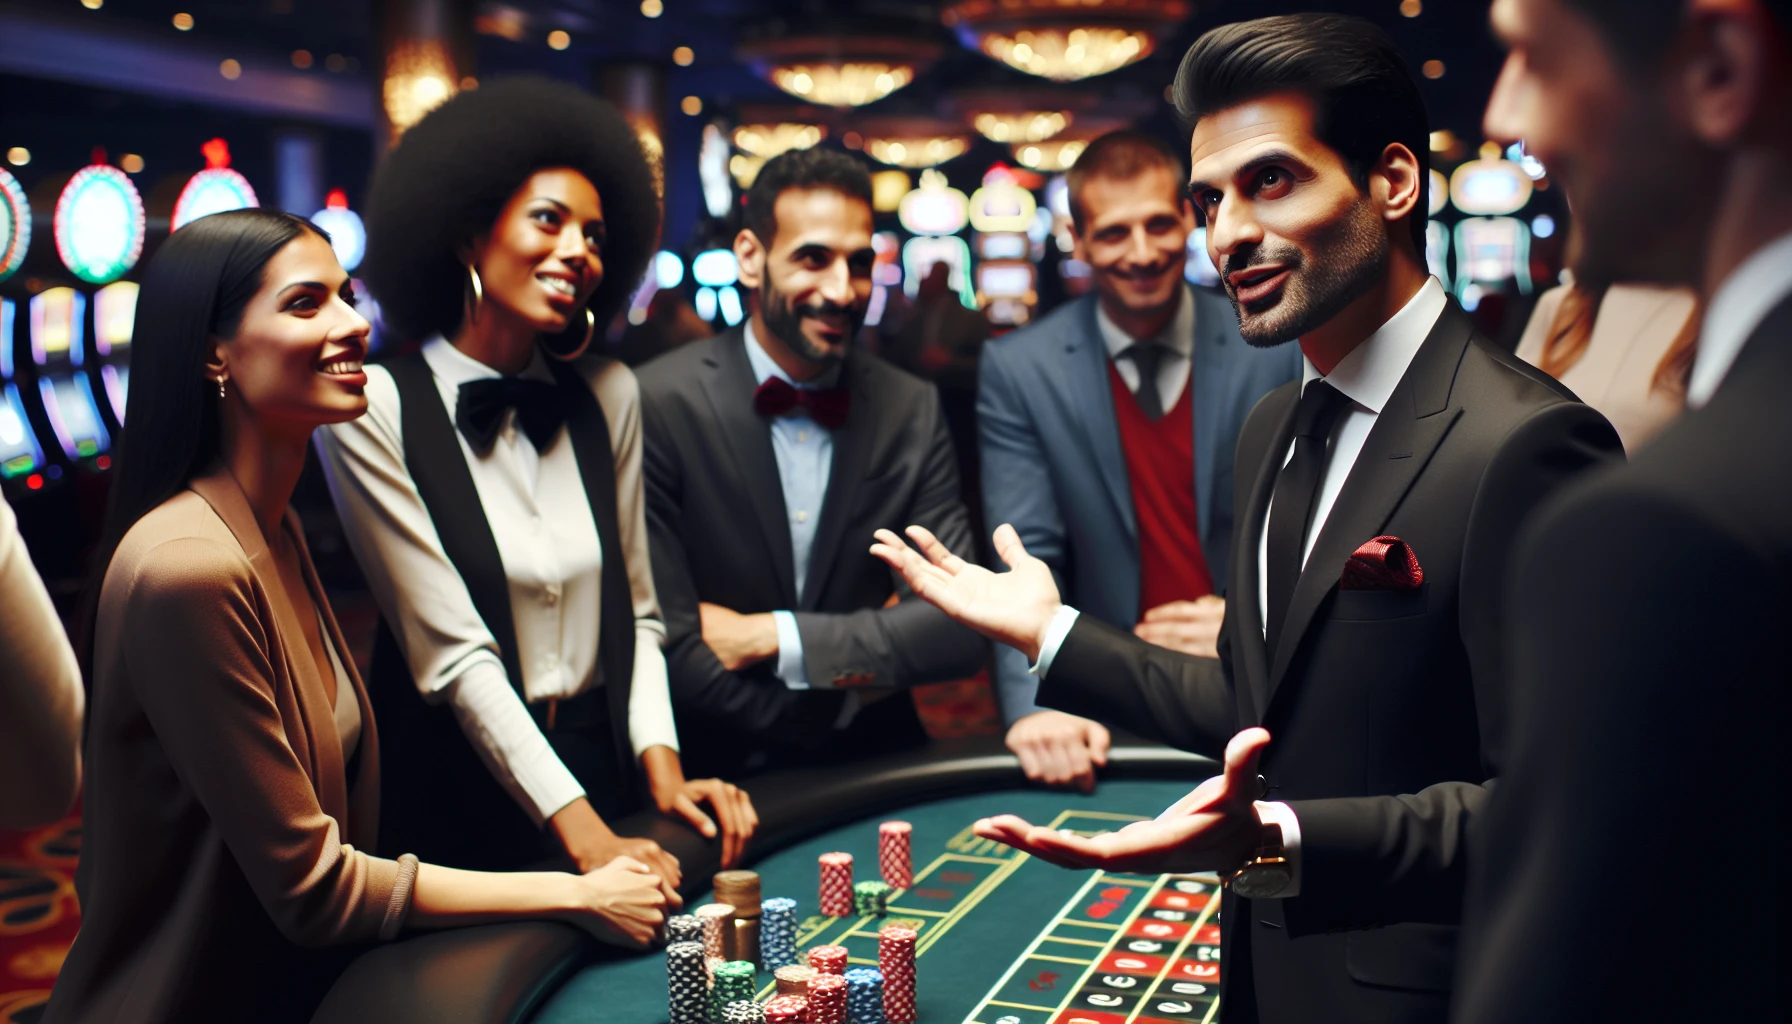 Illustration of a casino dealer networking with industry professionals at a casino event